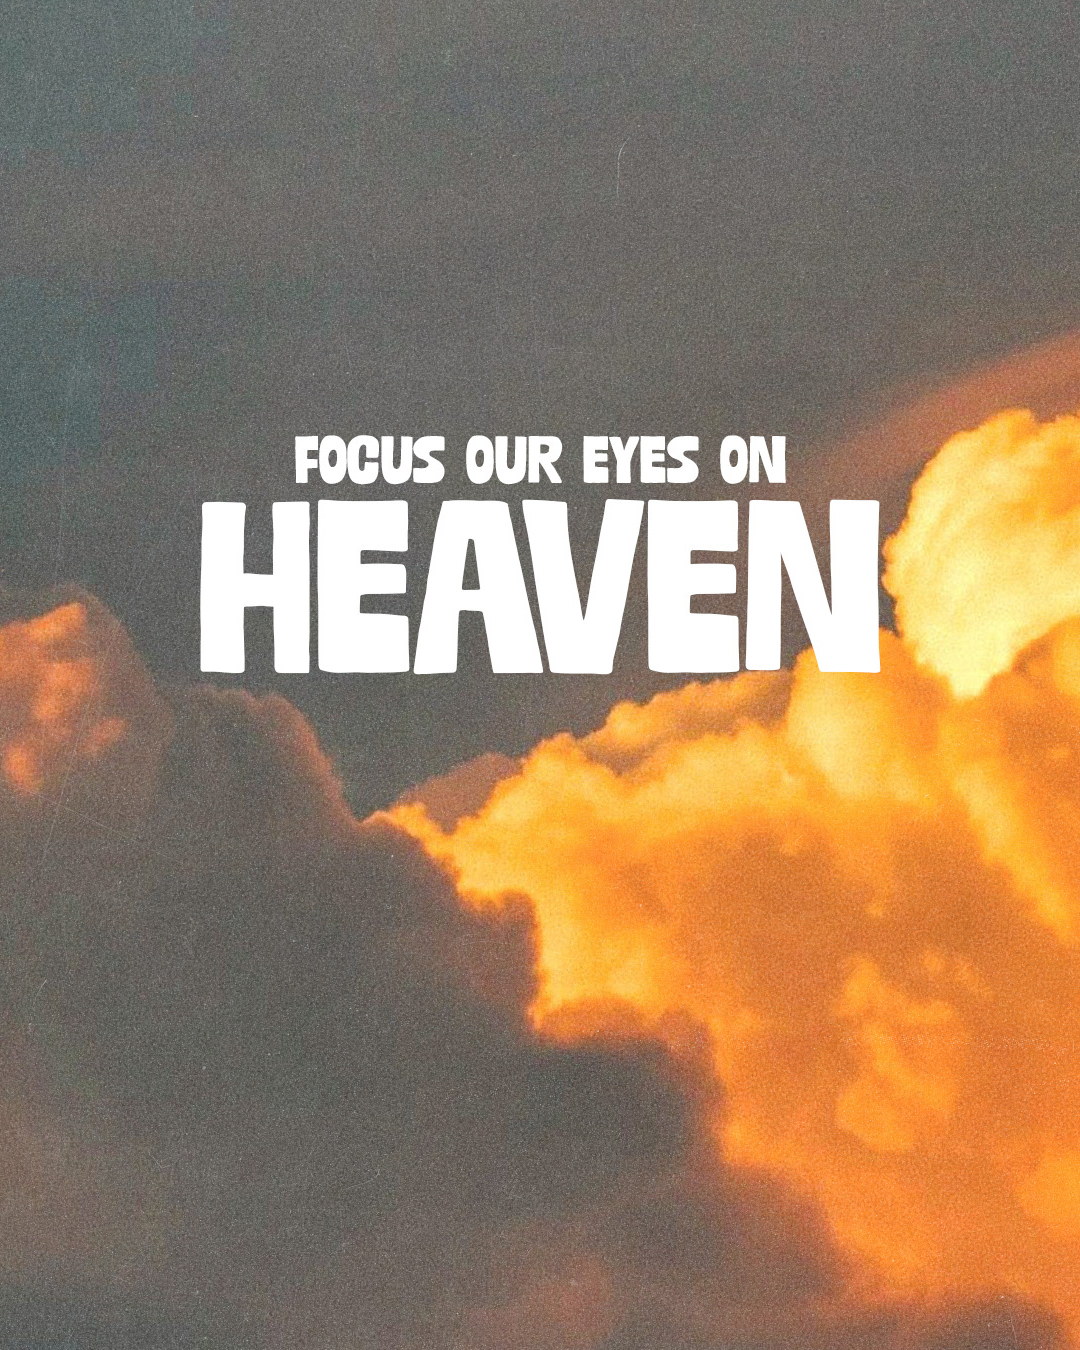 Focus our eyes on Heaven